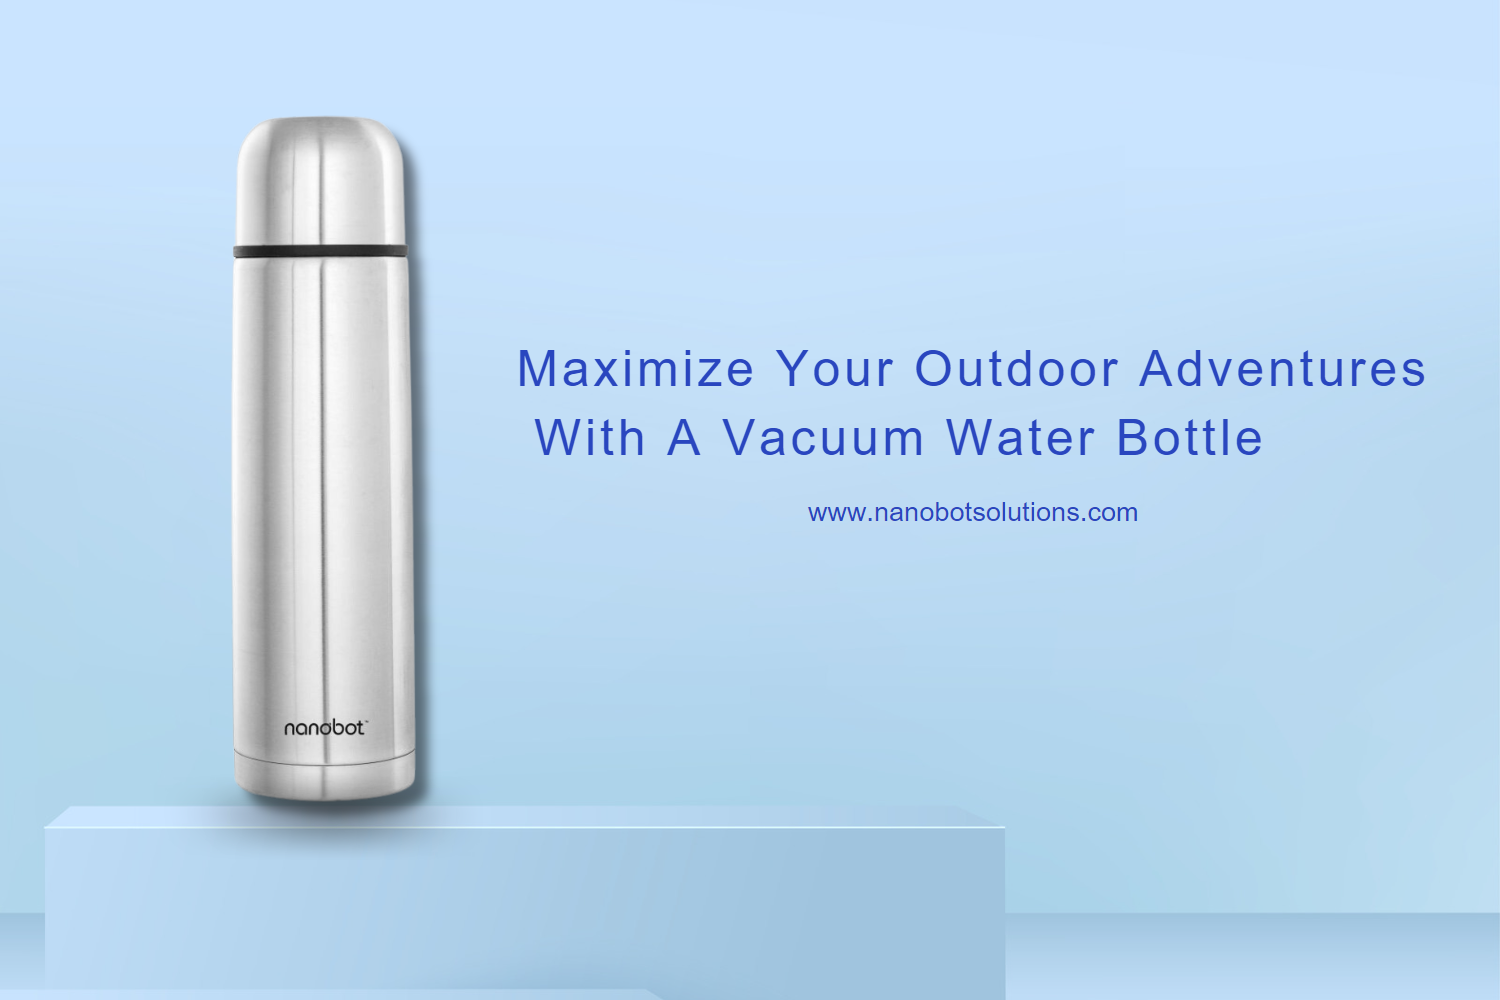 Maximize Your Outdoor Adventures with a Vacuum Water Bottle -Nanobot